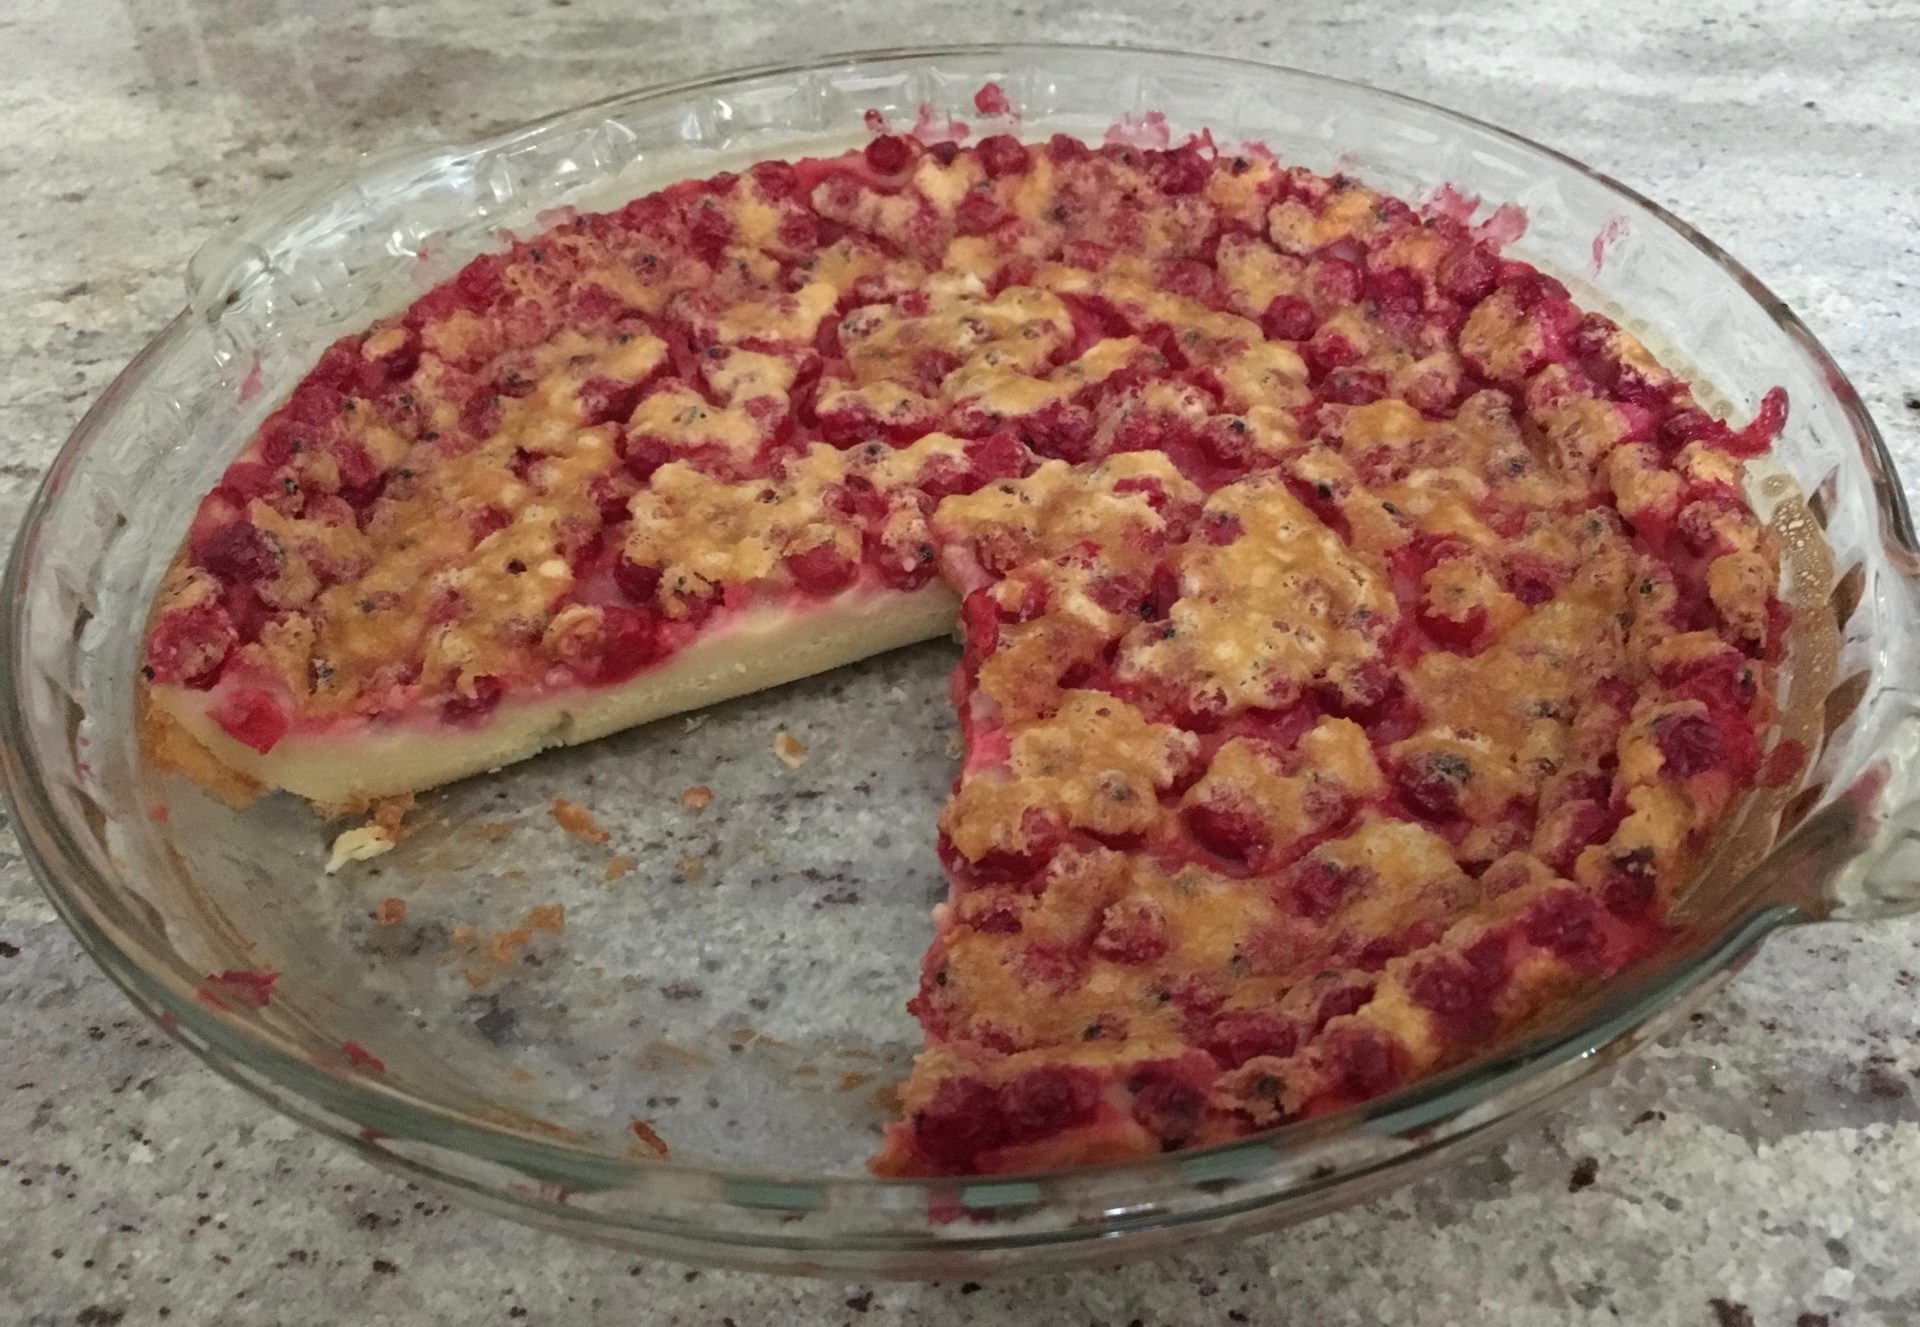 currant clafoutis missing a piece